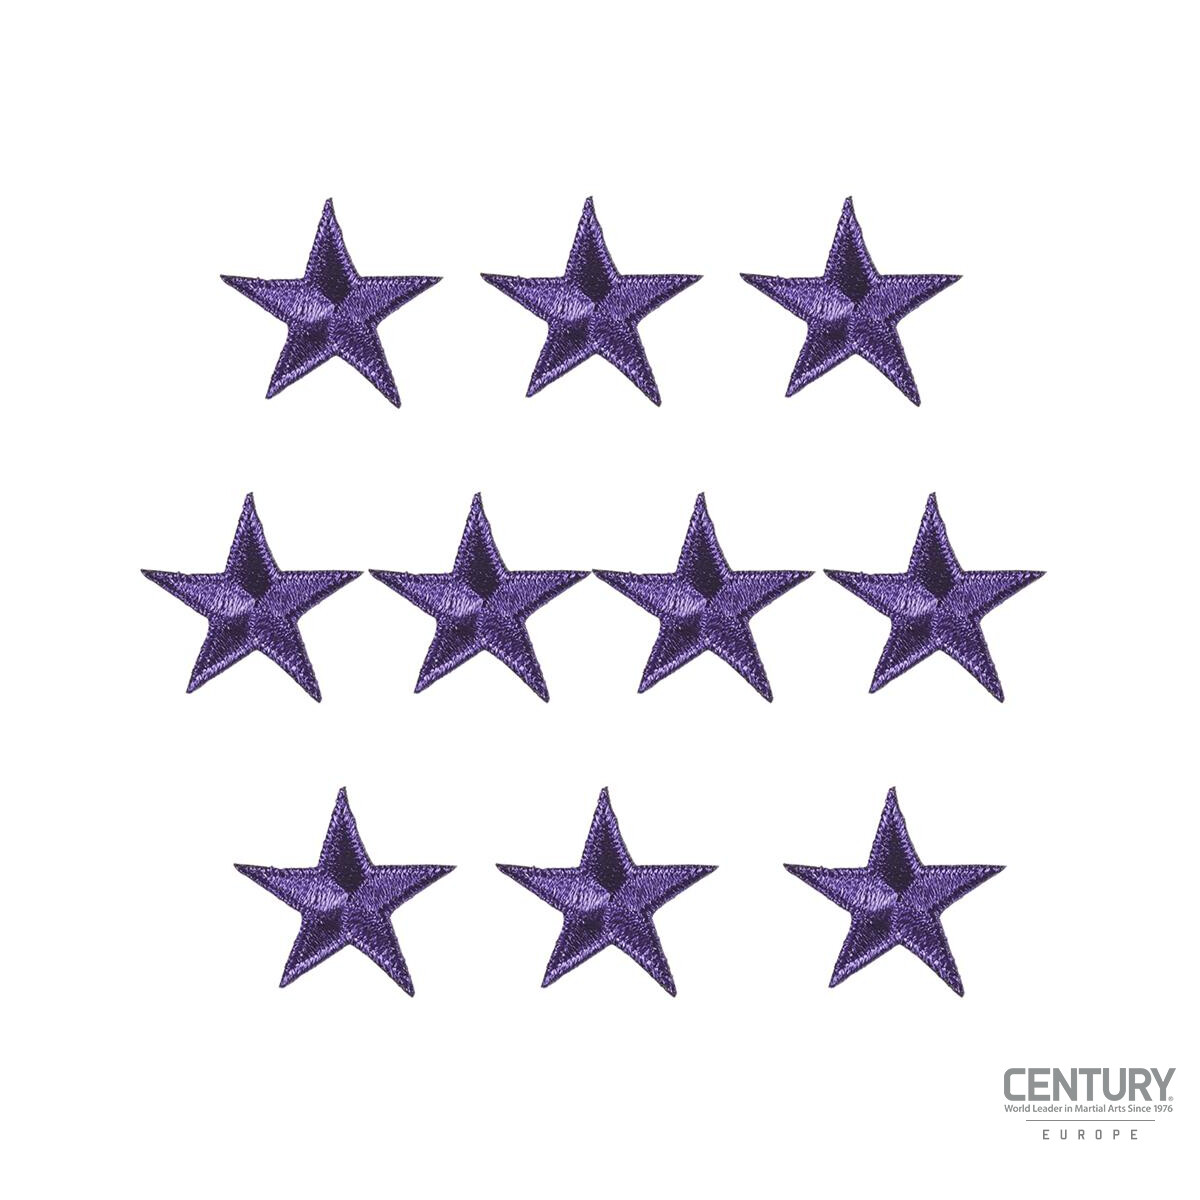 Star Patches 10 Pack Purple